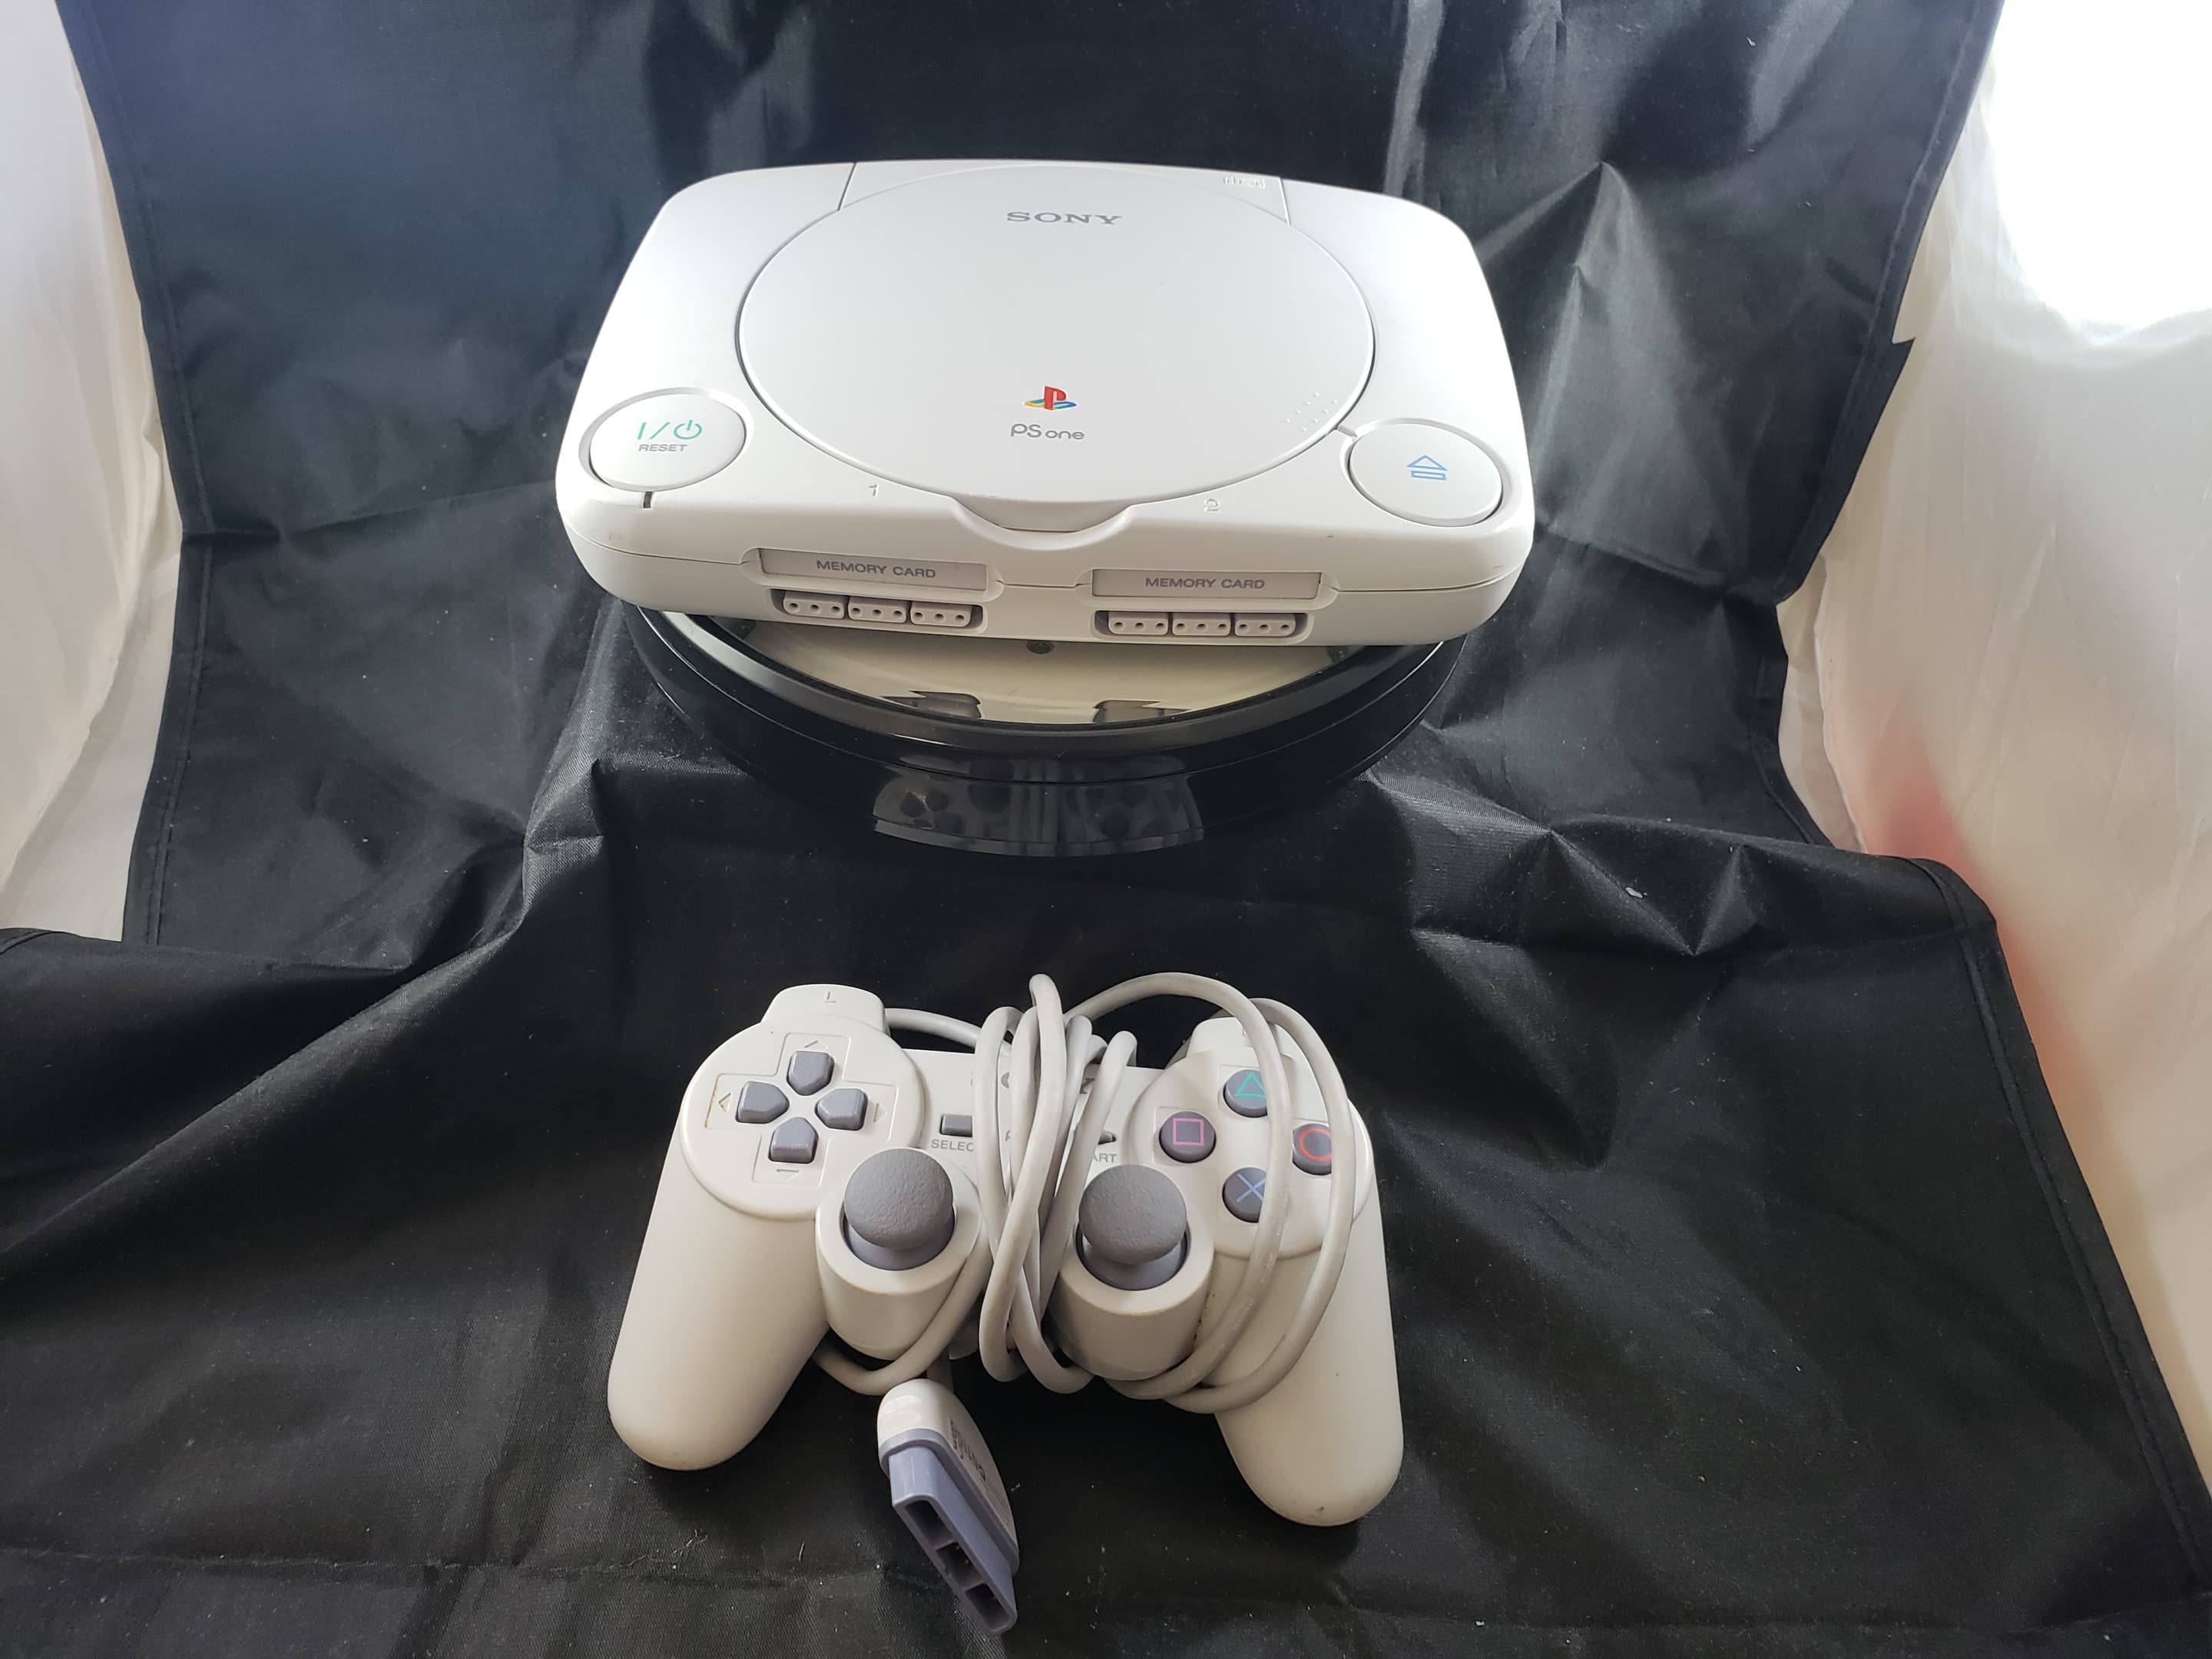 Sony Playstation PS One Video Game Console - White for sale online